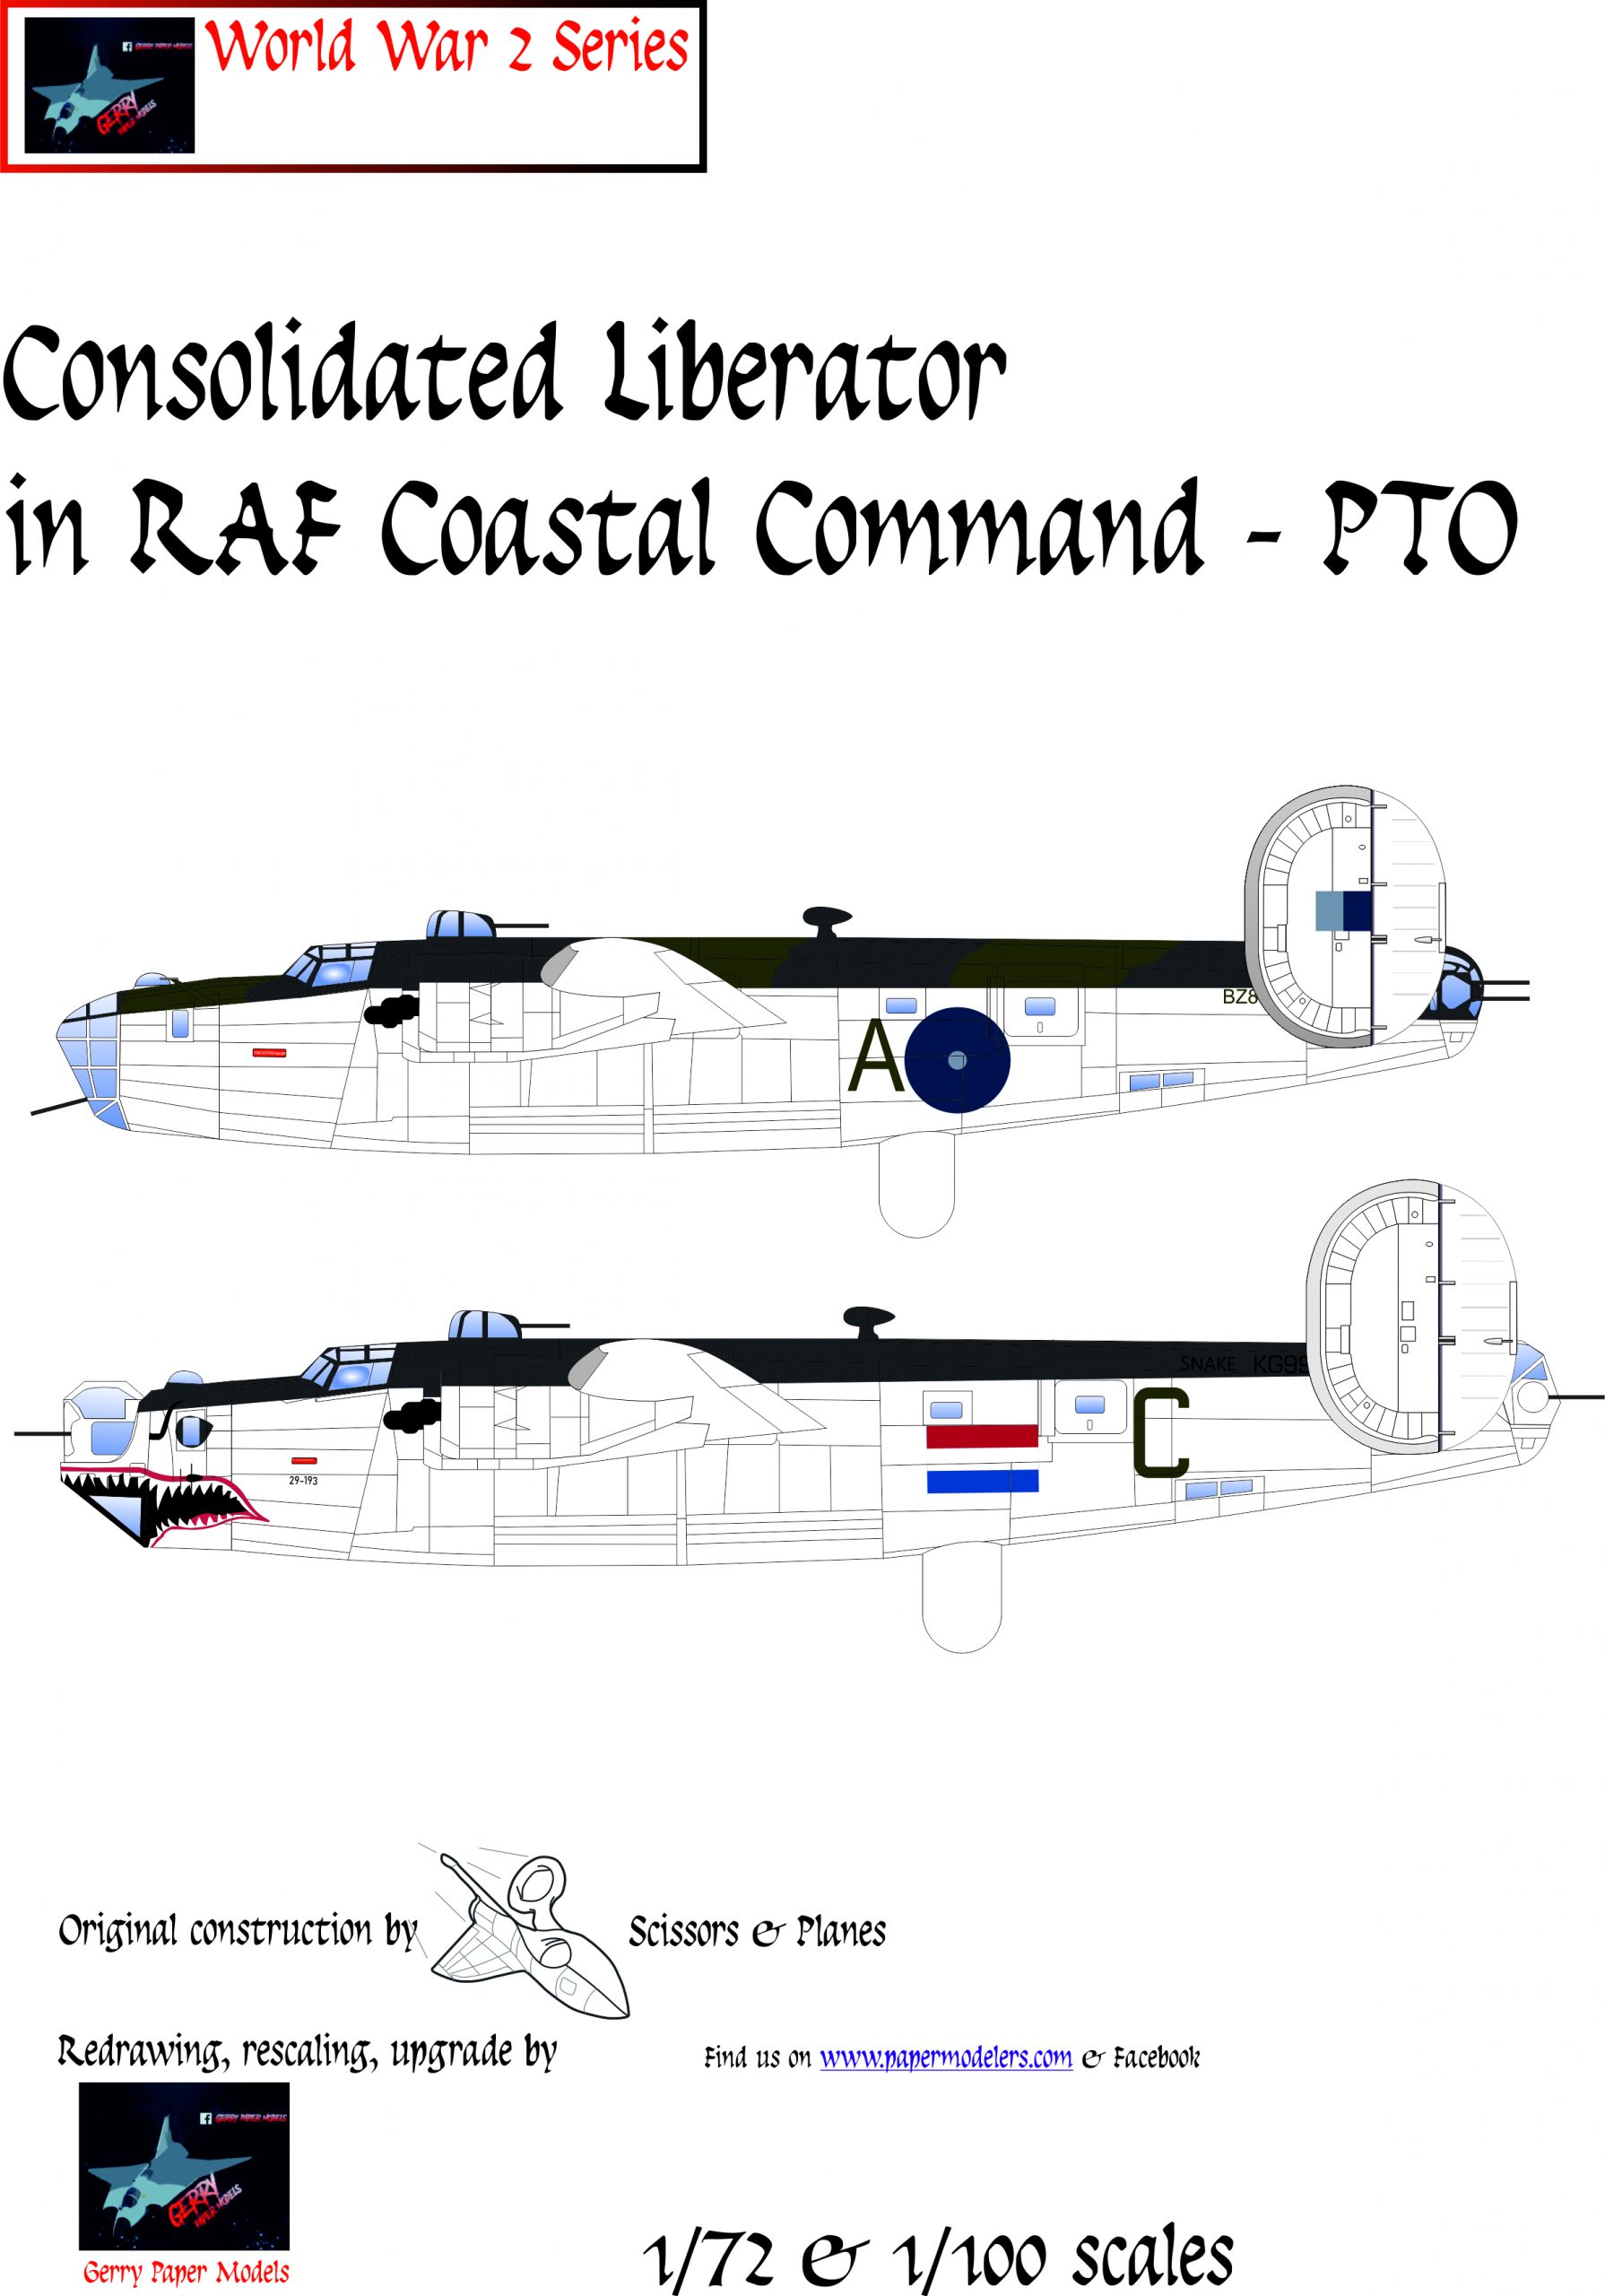 1/72 and 1/100 Consolidated B-24 Liberator in RAF Coastal Command